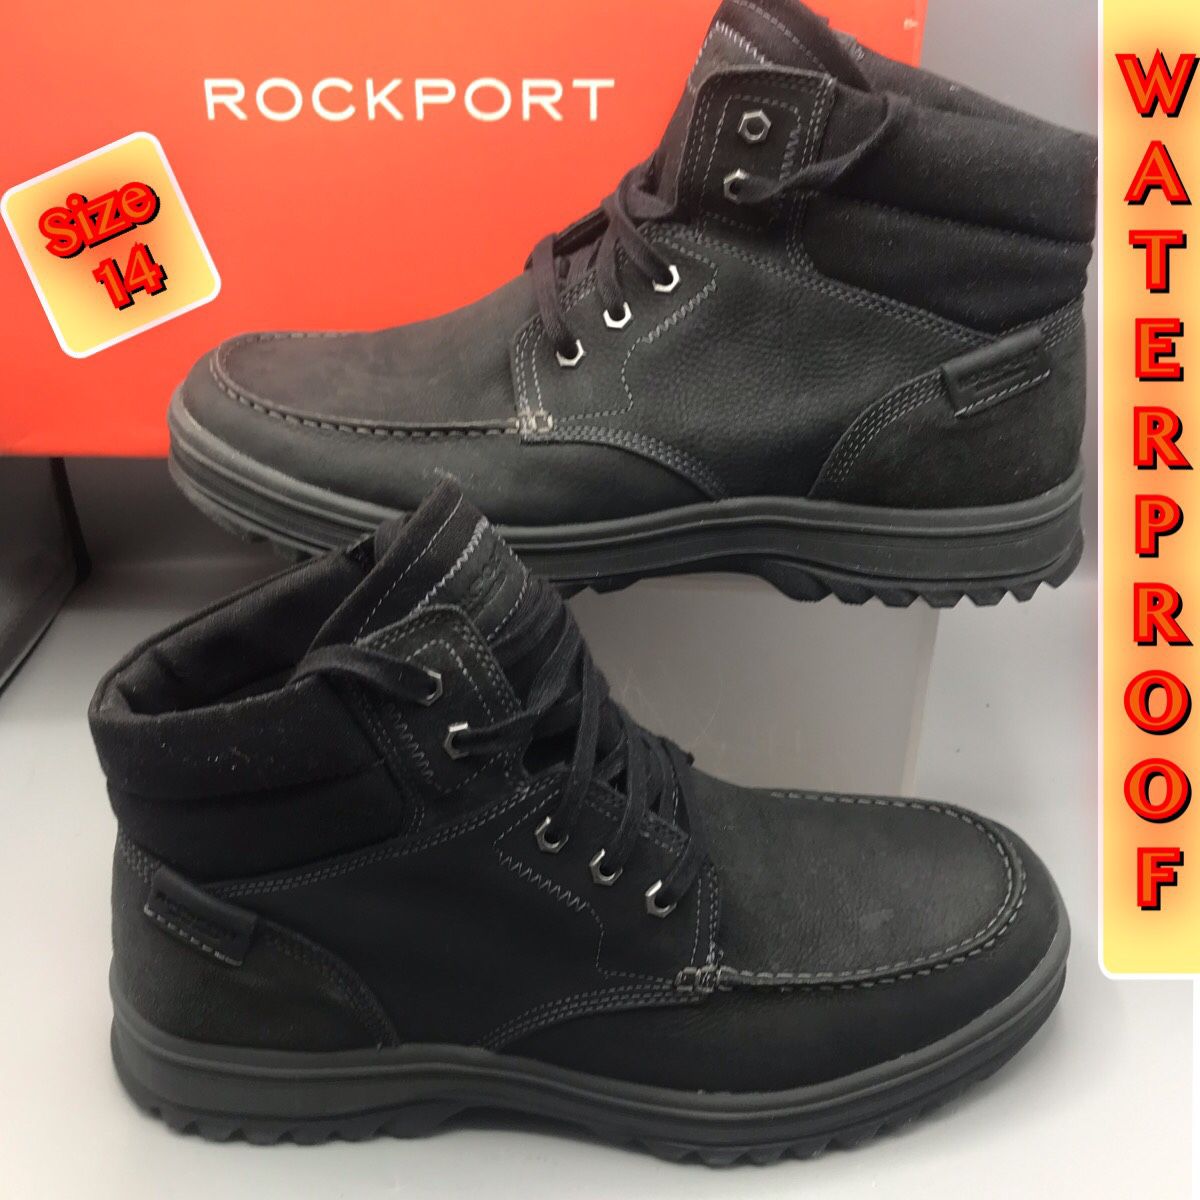 Brand New Rockport Waterproof Leather Upper Hydro Shield Comfortable Boots Size 14